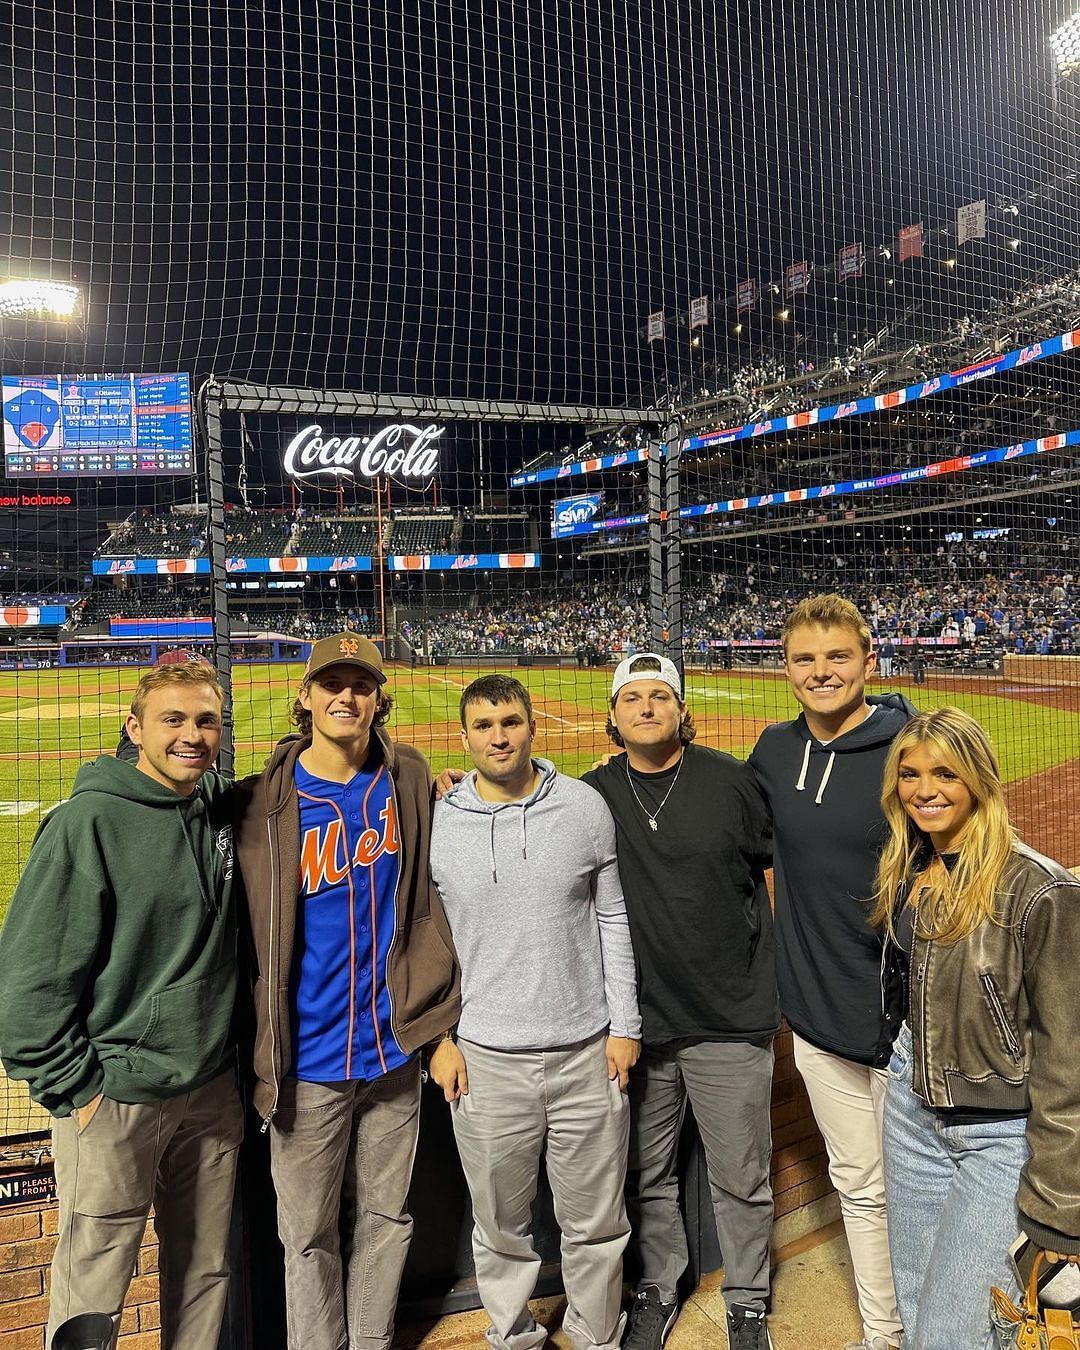 Nicolette Dellanno and Wilson (far right) at a Mets game. Credit: Shad Hathaway (IG)